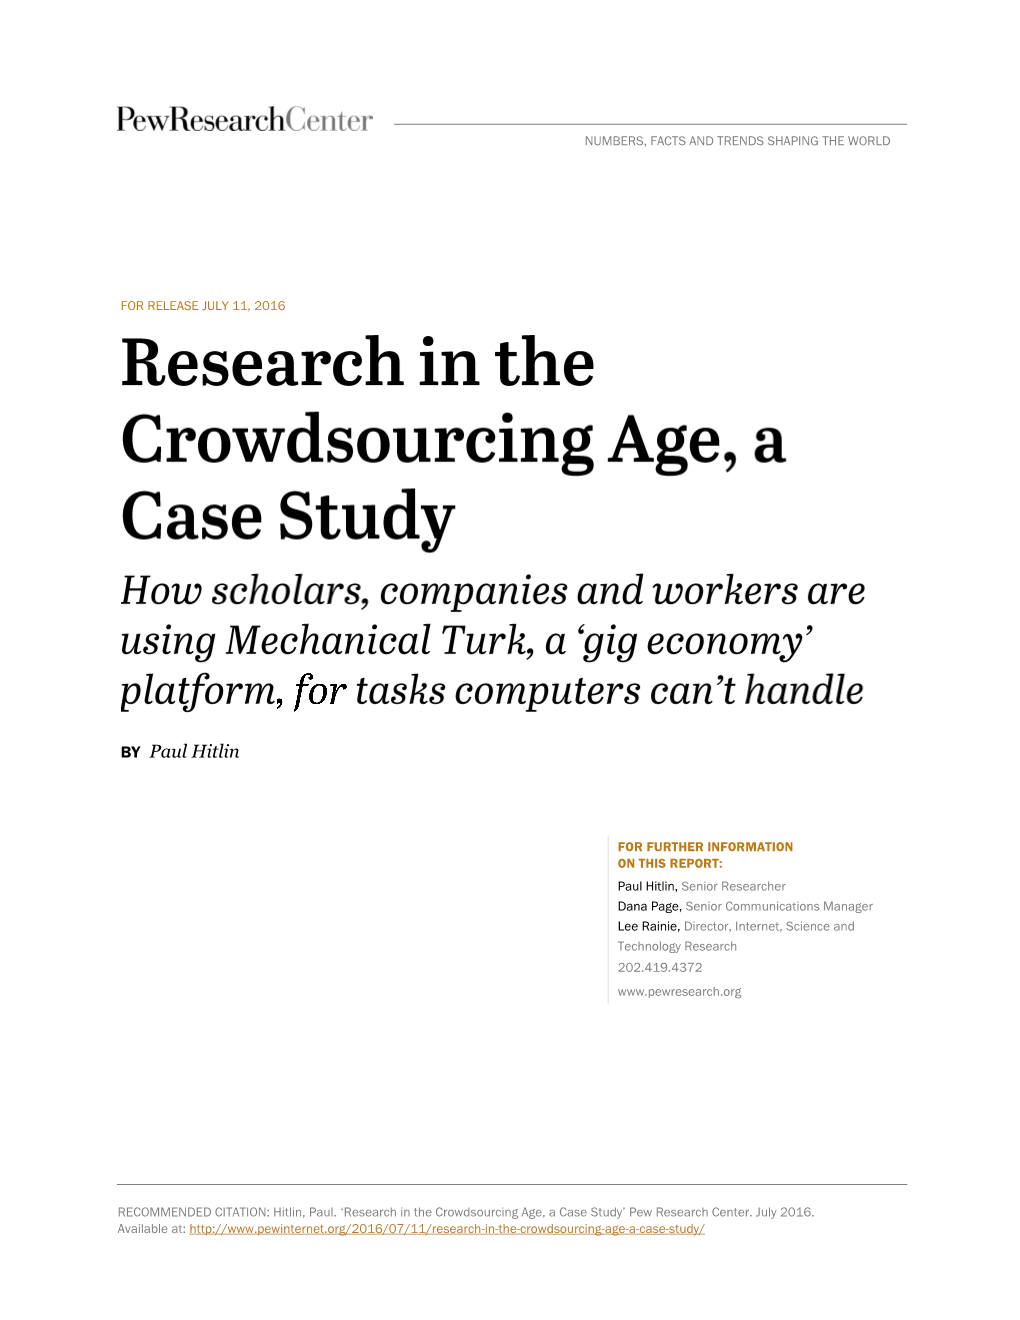 Research in the Crowdsourcing Age, a Case Study’ Pew Research Center